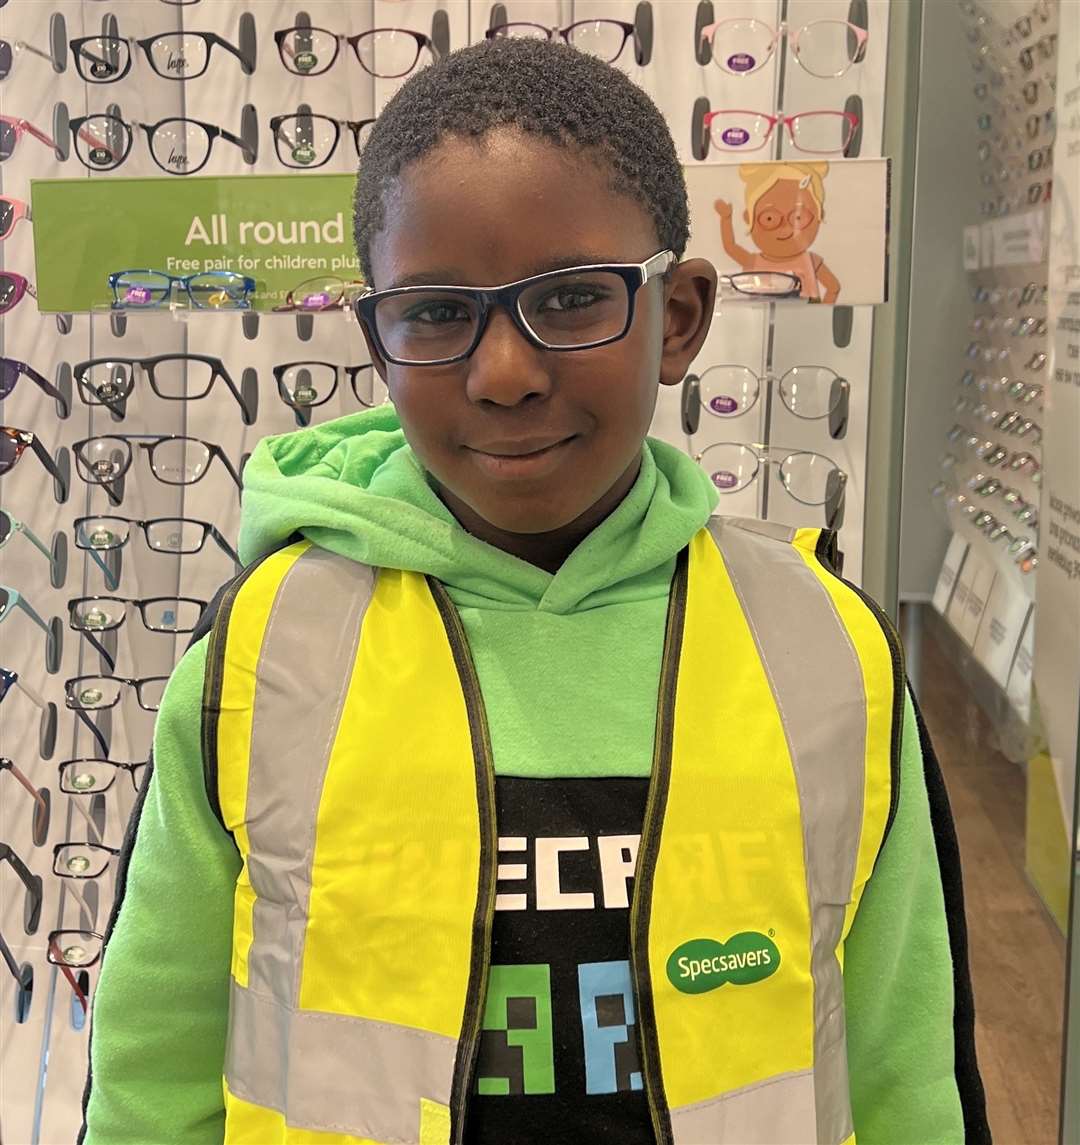 There are 1,000 free hi-vis jackets to give away. Picture: Specsavers Medway Stores